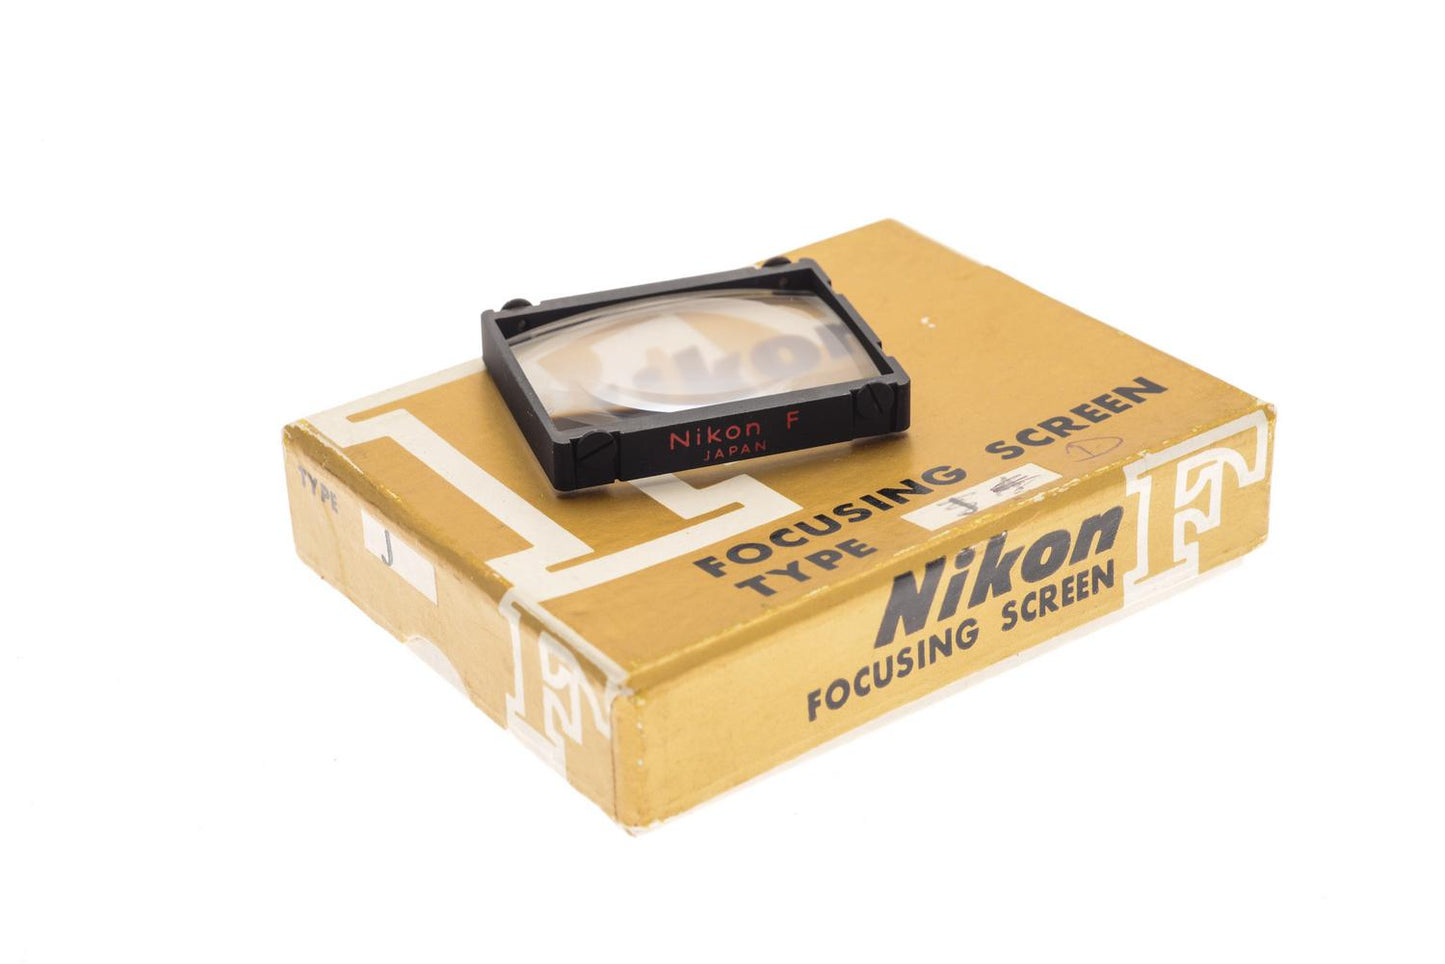 Nikon Focusing Screen Type D for F & F2 - Accessory